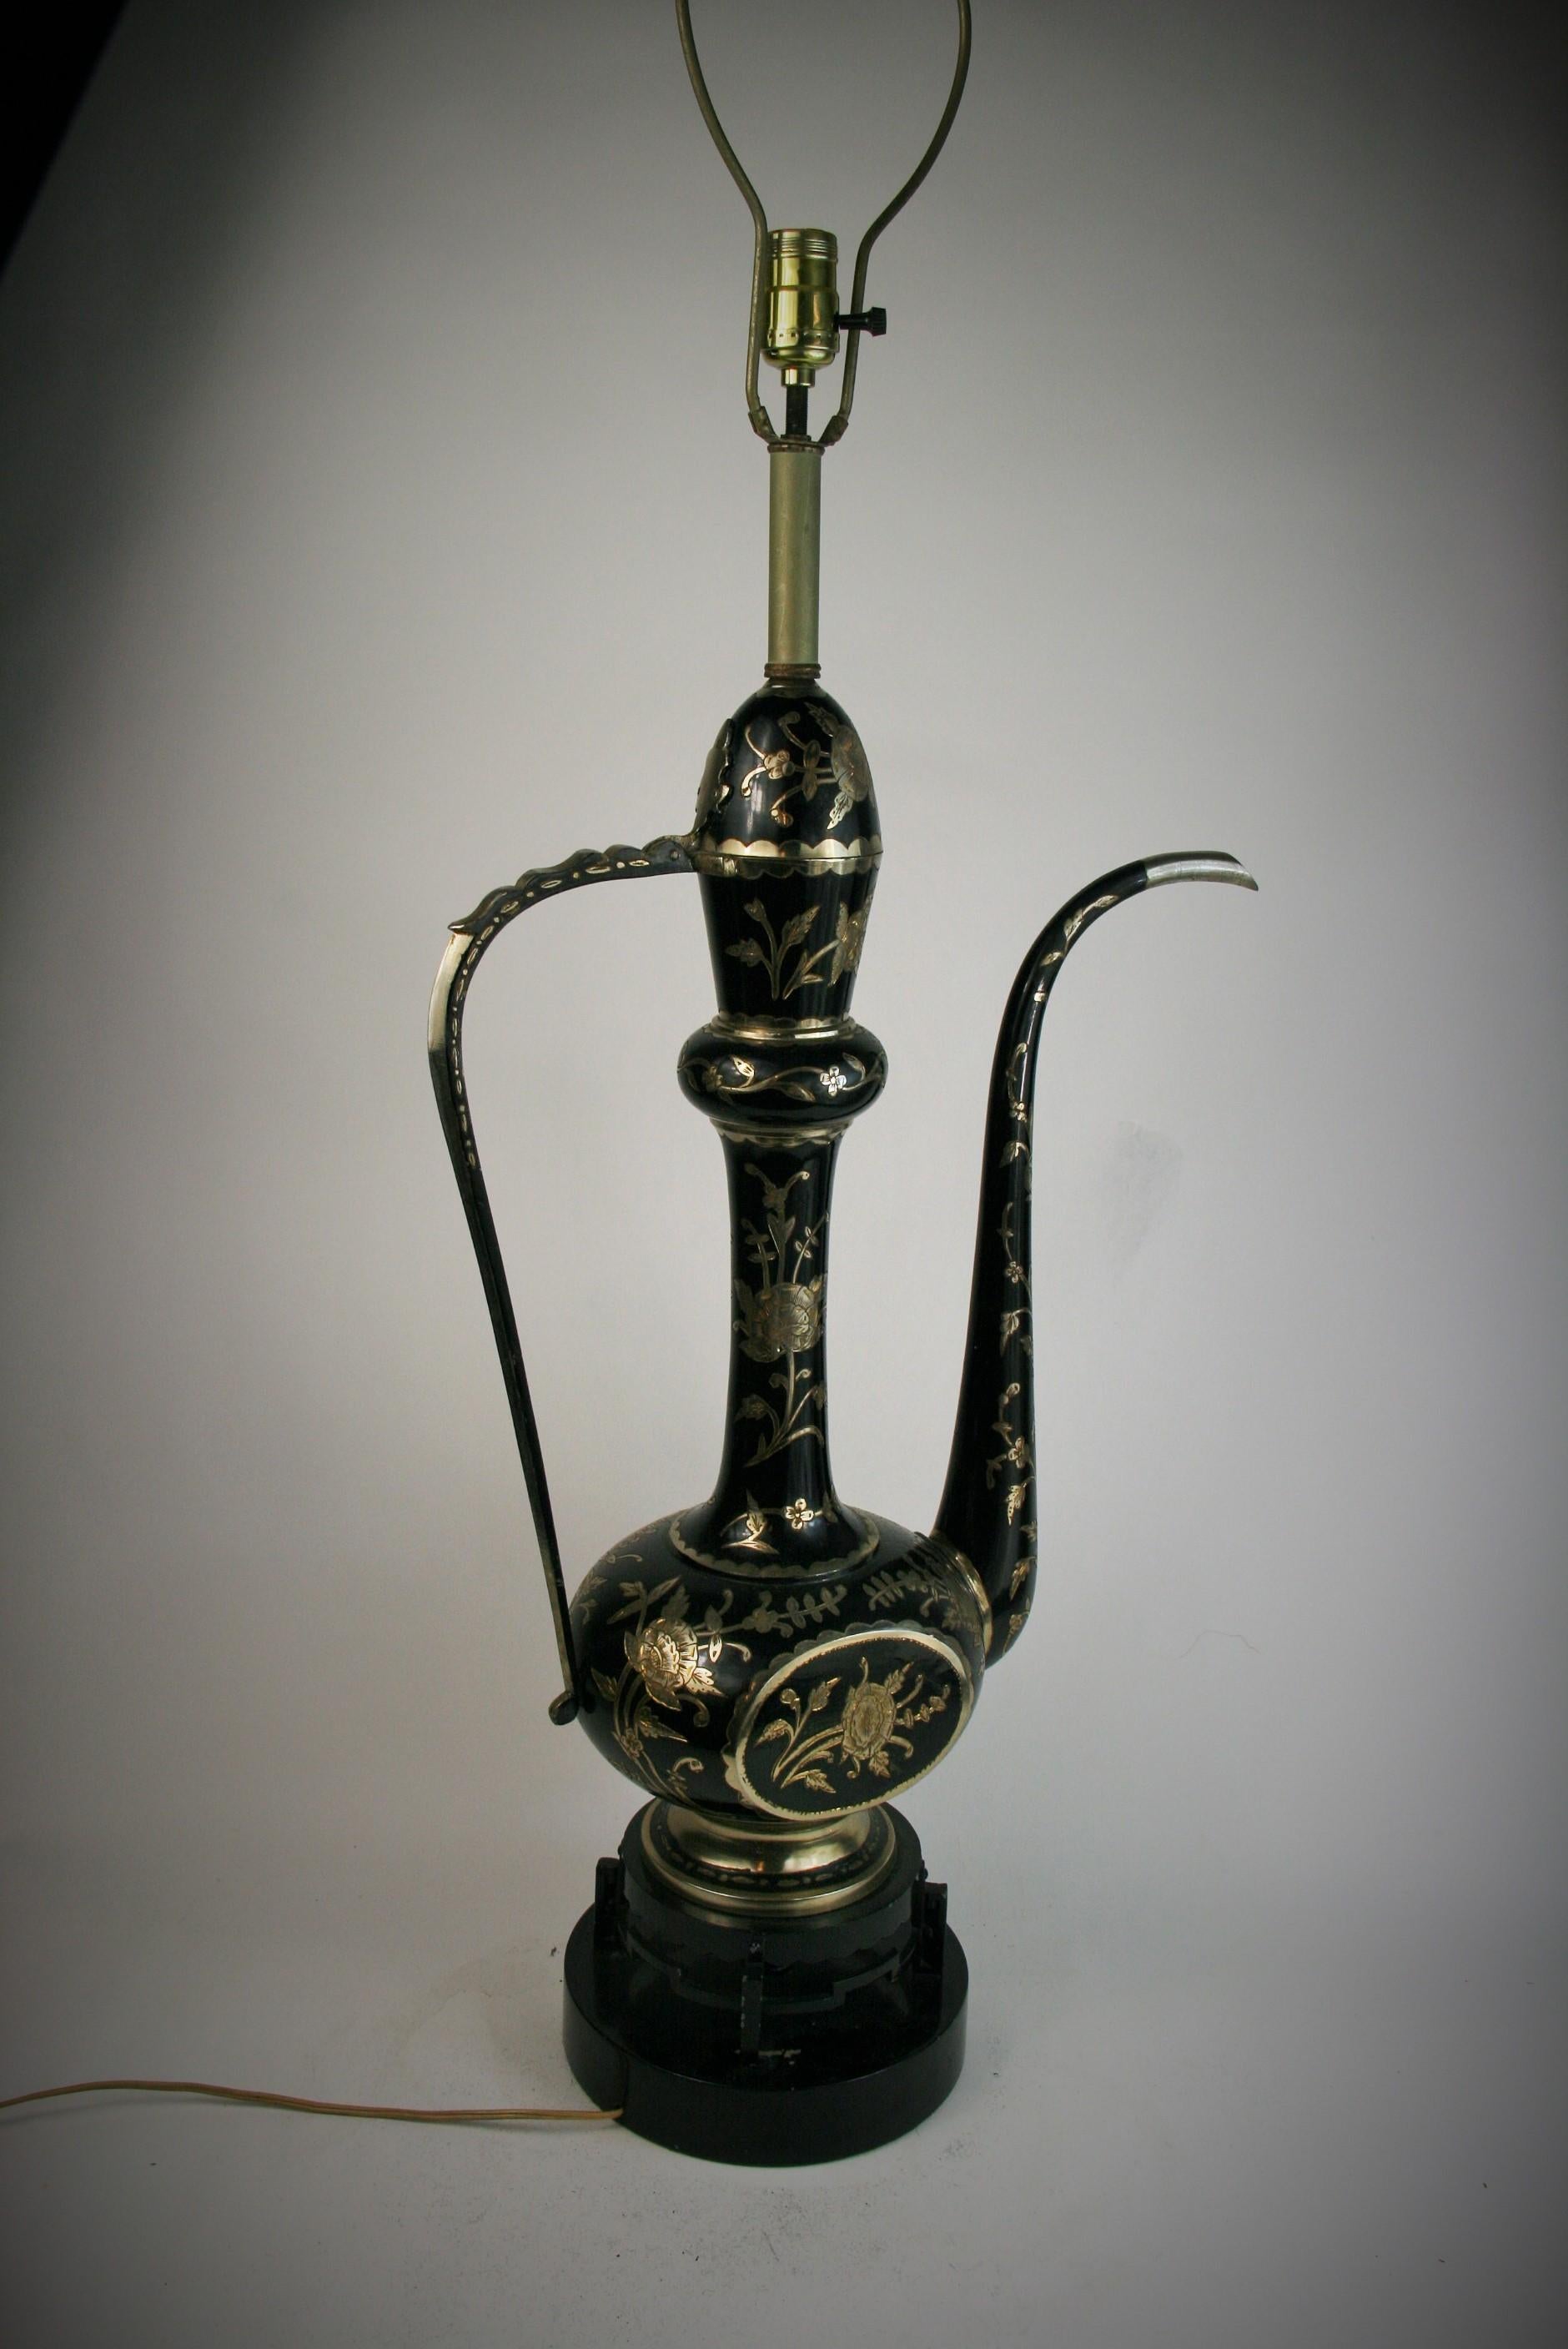 2-298 black enameled etched silver plated brass ewer shaped tall table lamp. The lamp has decorative cut outs in the black enamel making intricate floral and leaf designs.
Set on a double base of metal and lacquered wood.
Original wiring in working